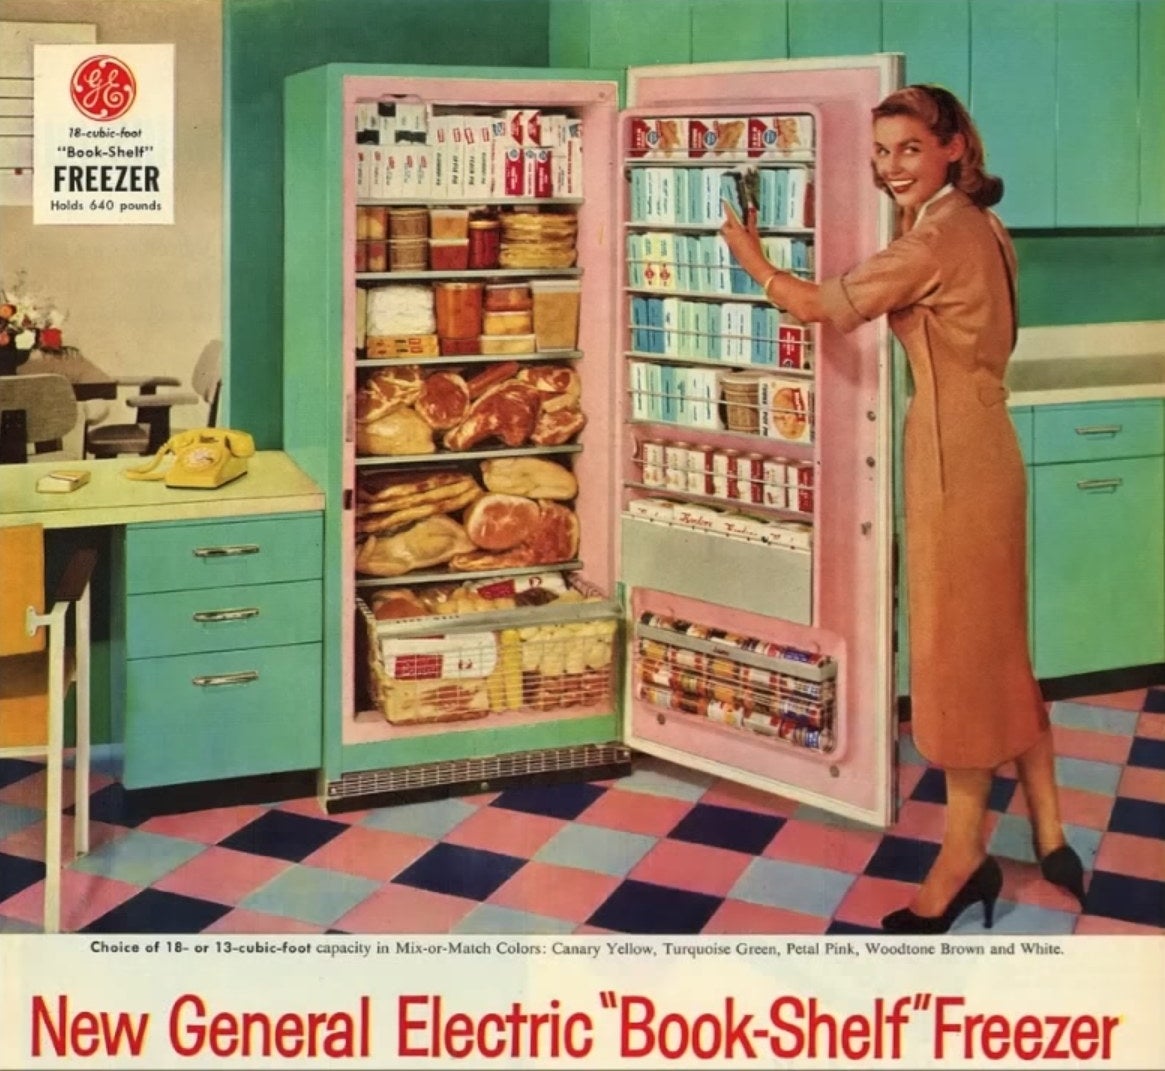 A woman displays a stuffed electric fridge in an advertisement